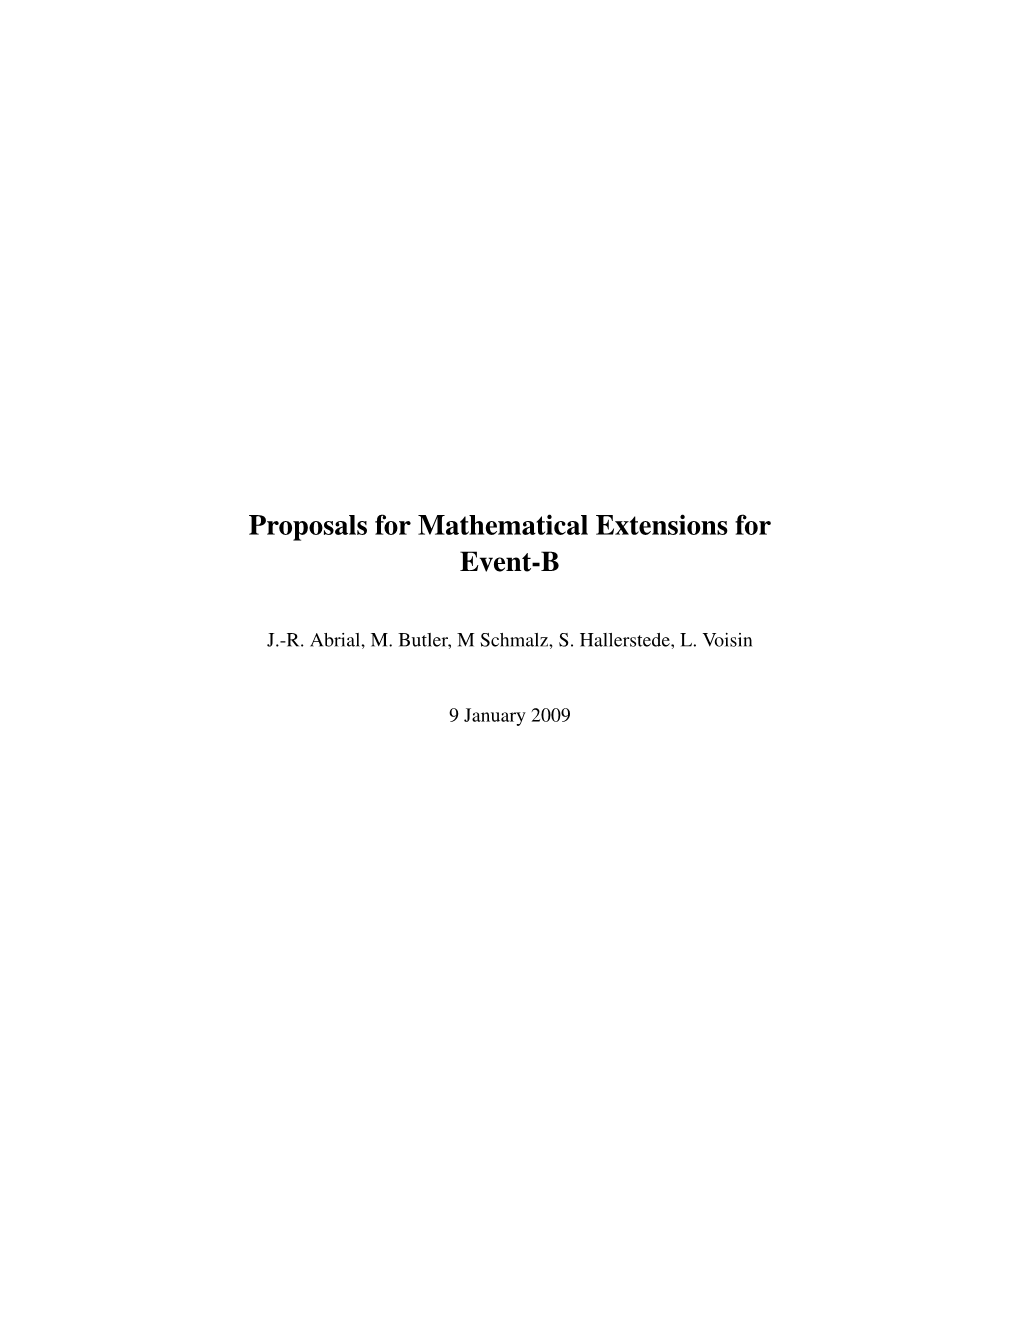 Proposals for Mathematical Extensions for Event-B